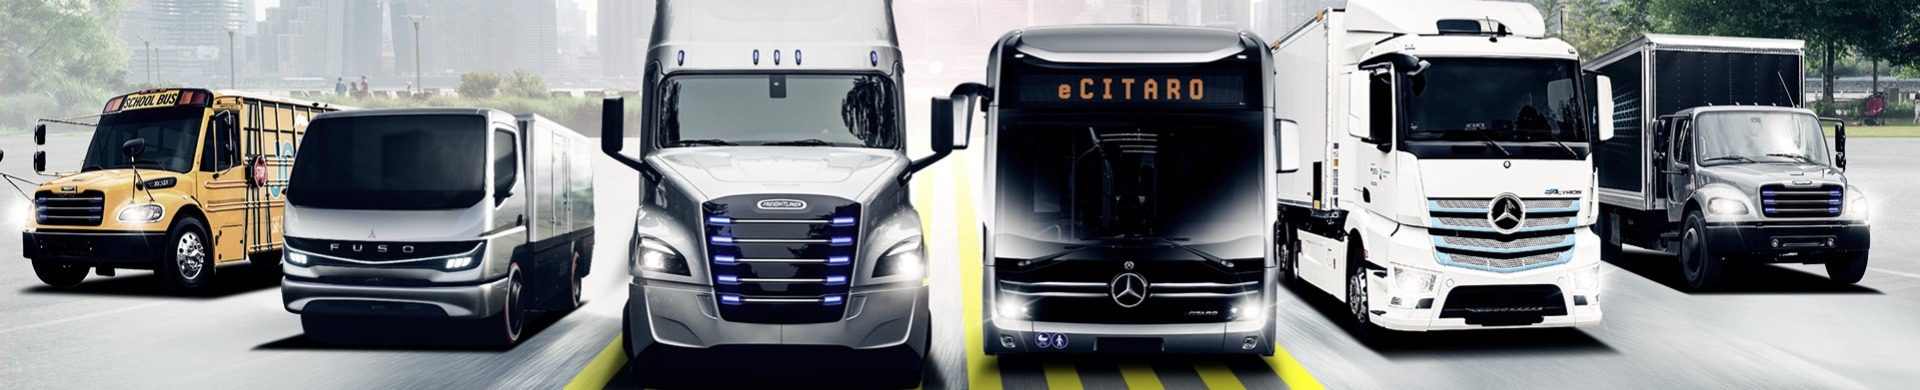 Daimler Truck Banner Image contains multiple vehicles that represent each company